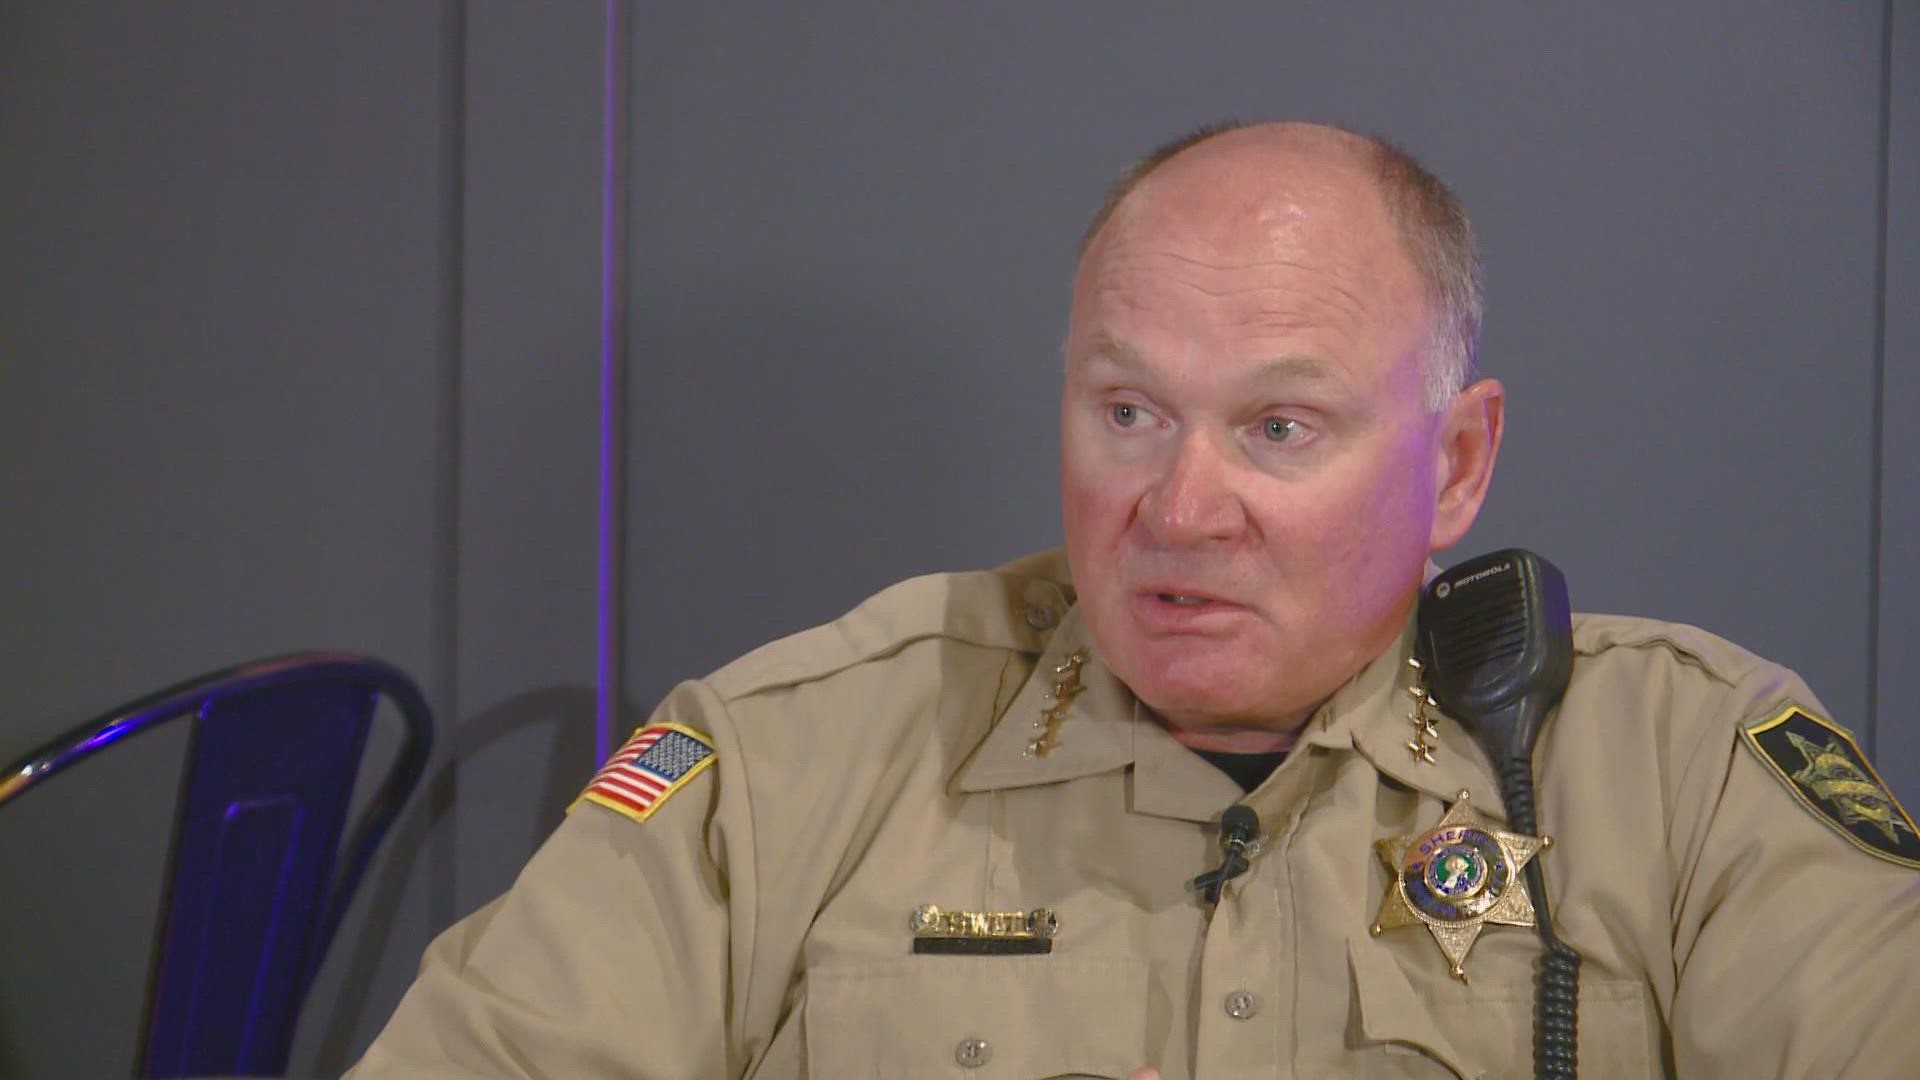 Sheriff Knezovichs Plan To Clear Out Spokane Homeless Camp